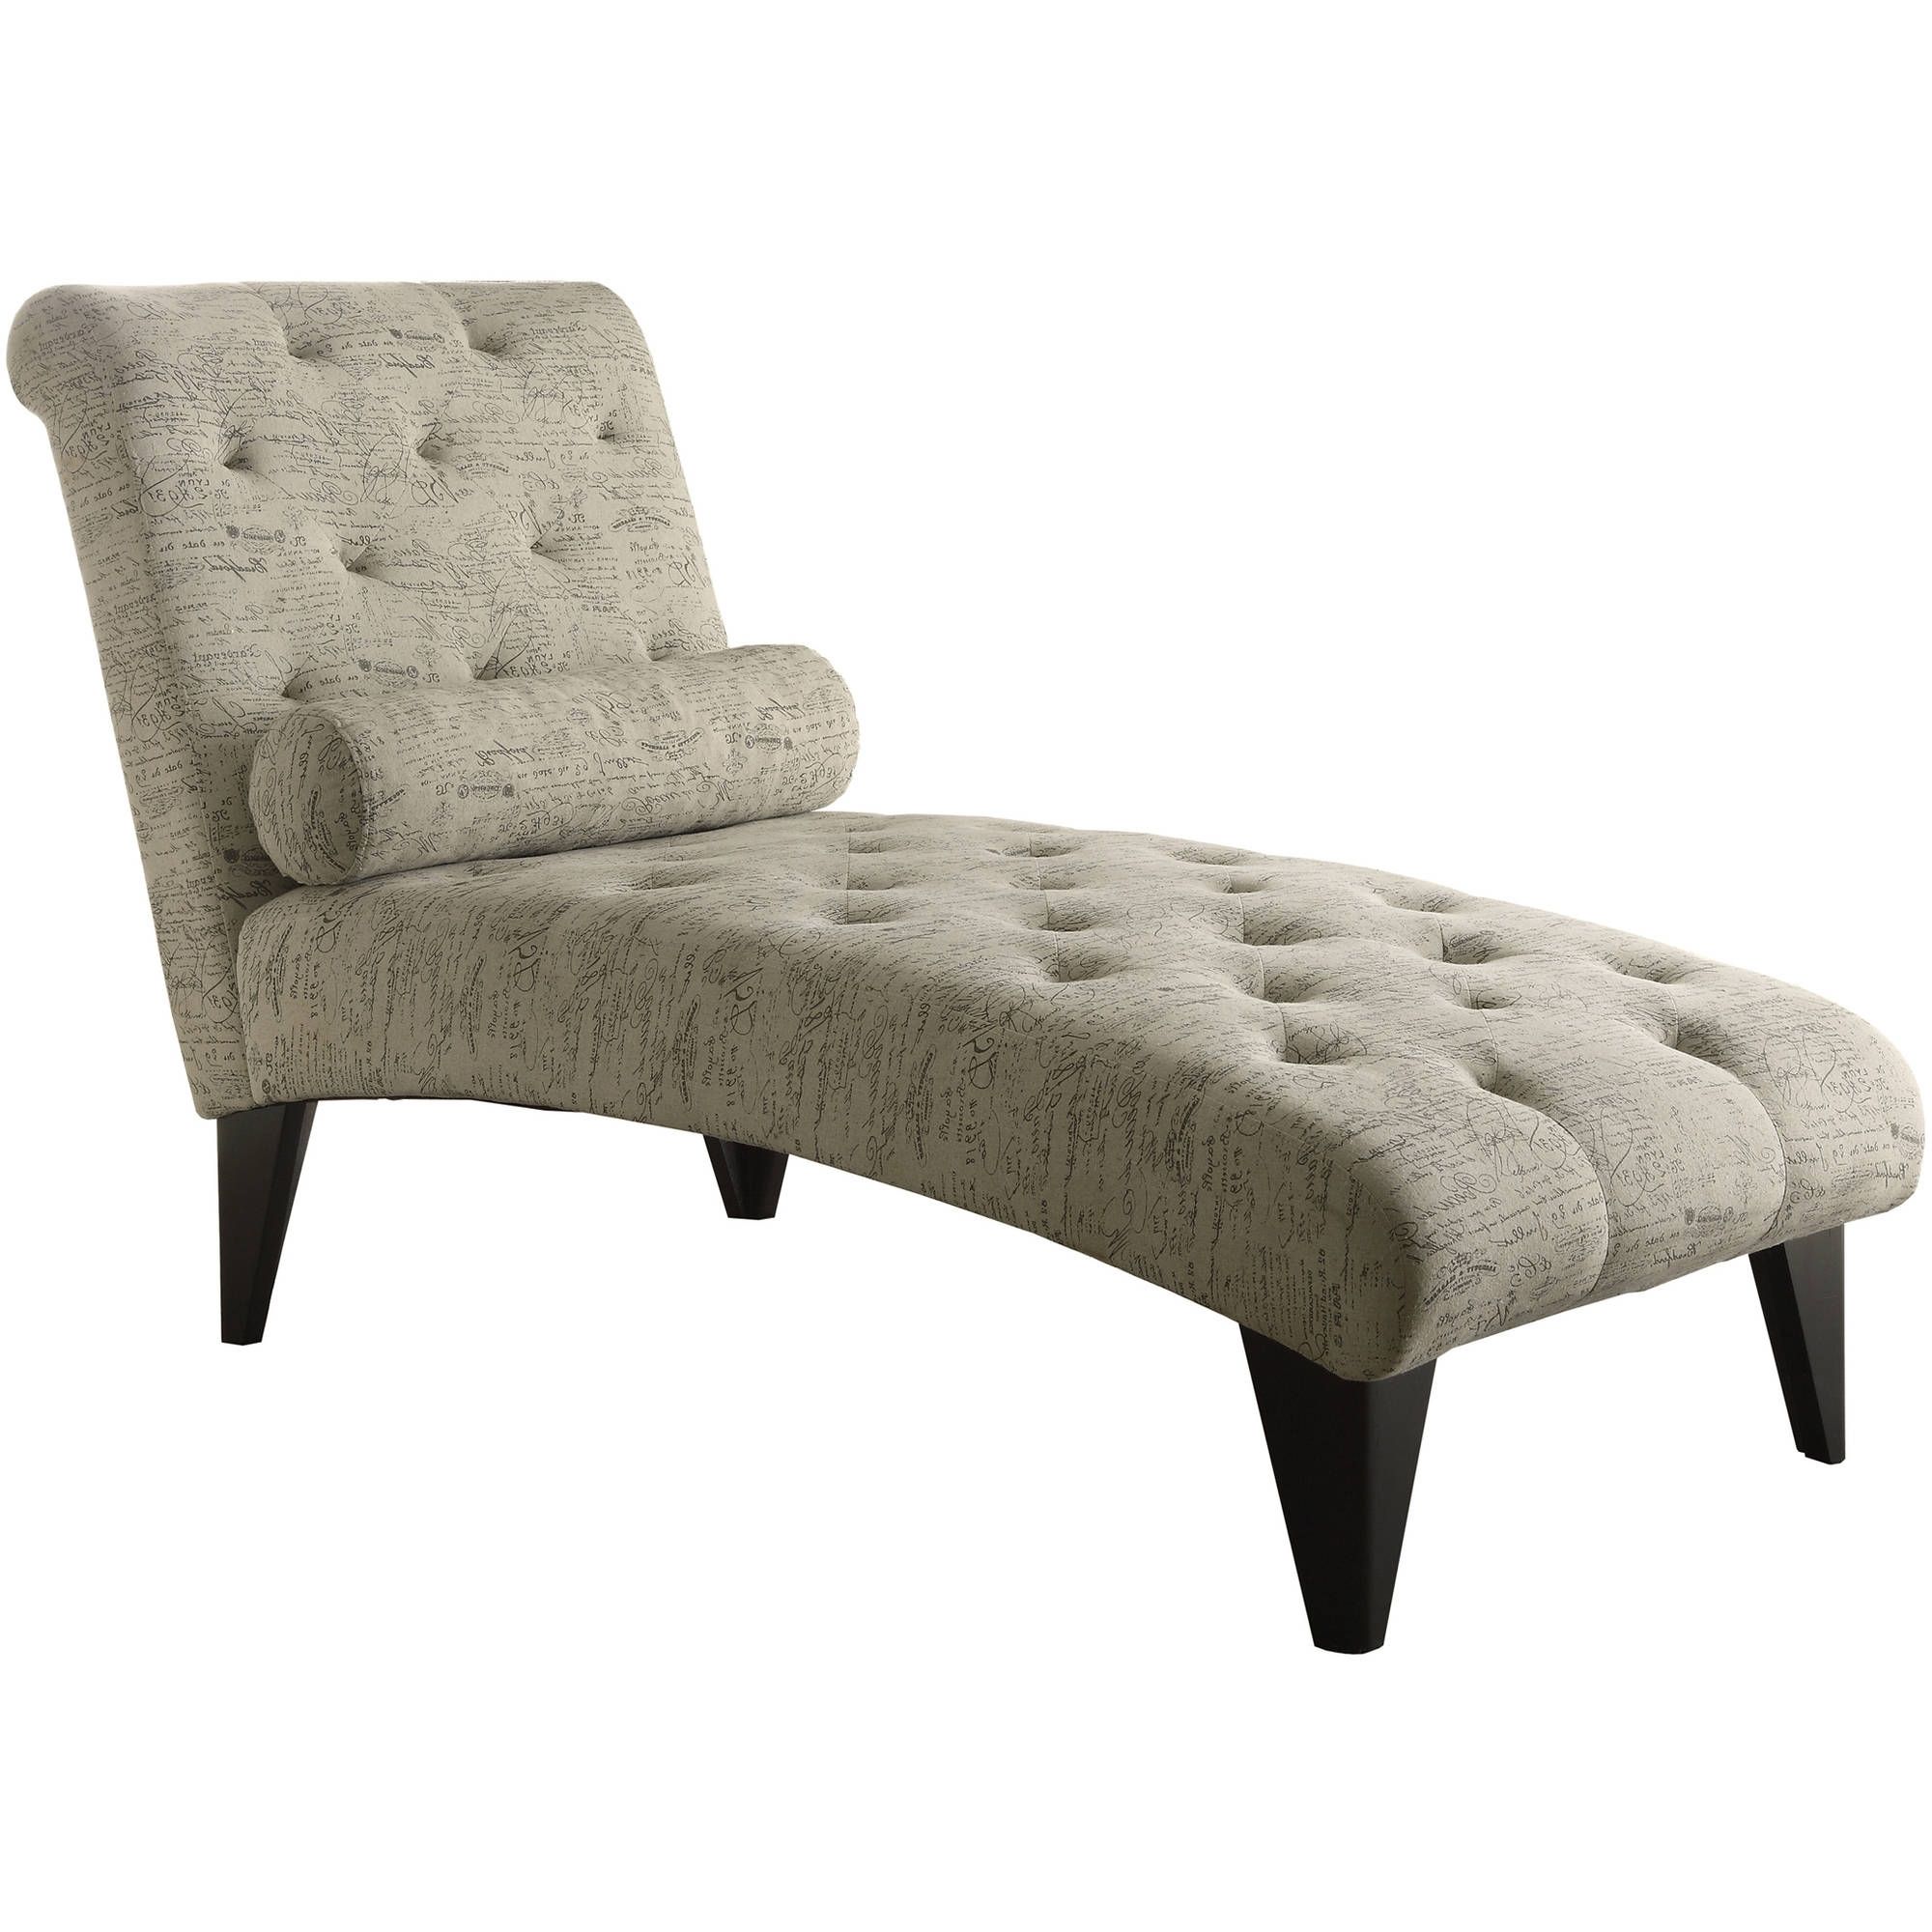 Chaise Lounges – Walmart With Well Known Gray Chaise Lounges (View 9 of 15)